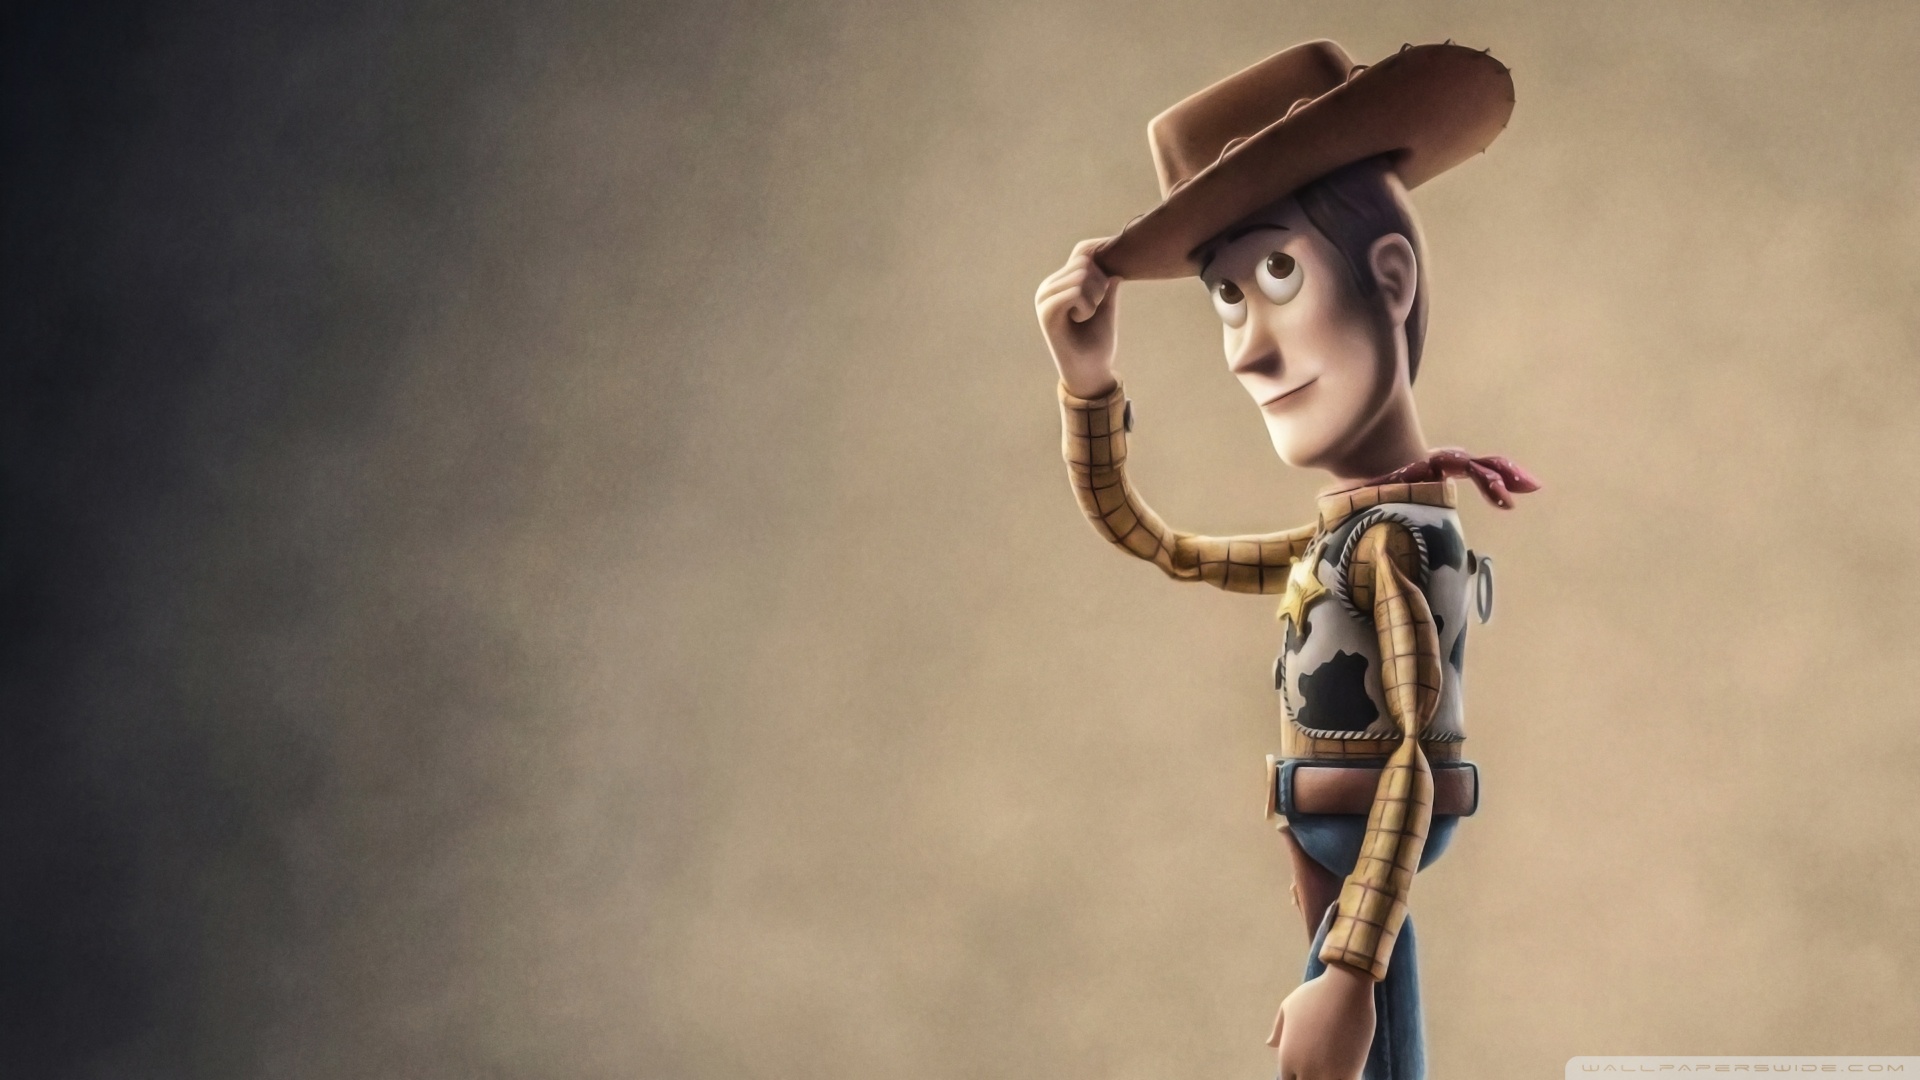 wallpaperswide.com_woody_toy_story_4-wallpaper-1920x1080.jpg